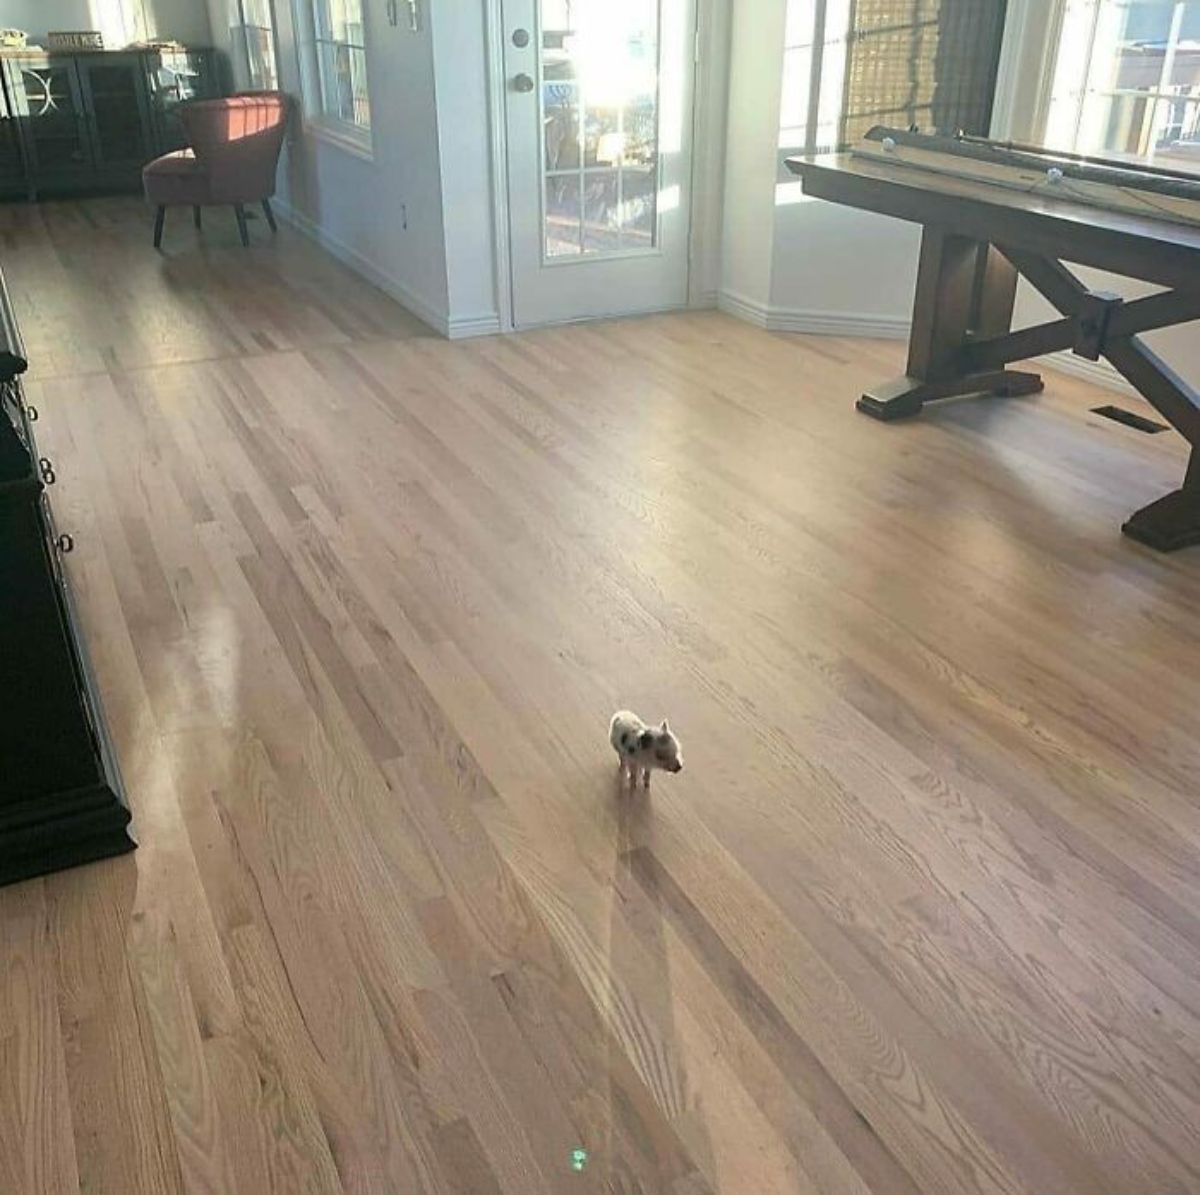 black and white piglet standing in the middle of a wooden floor